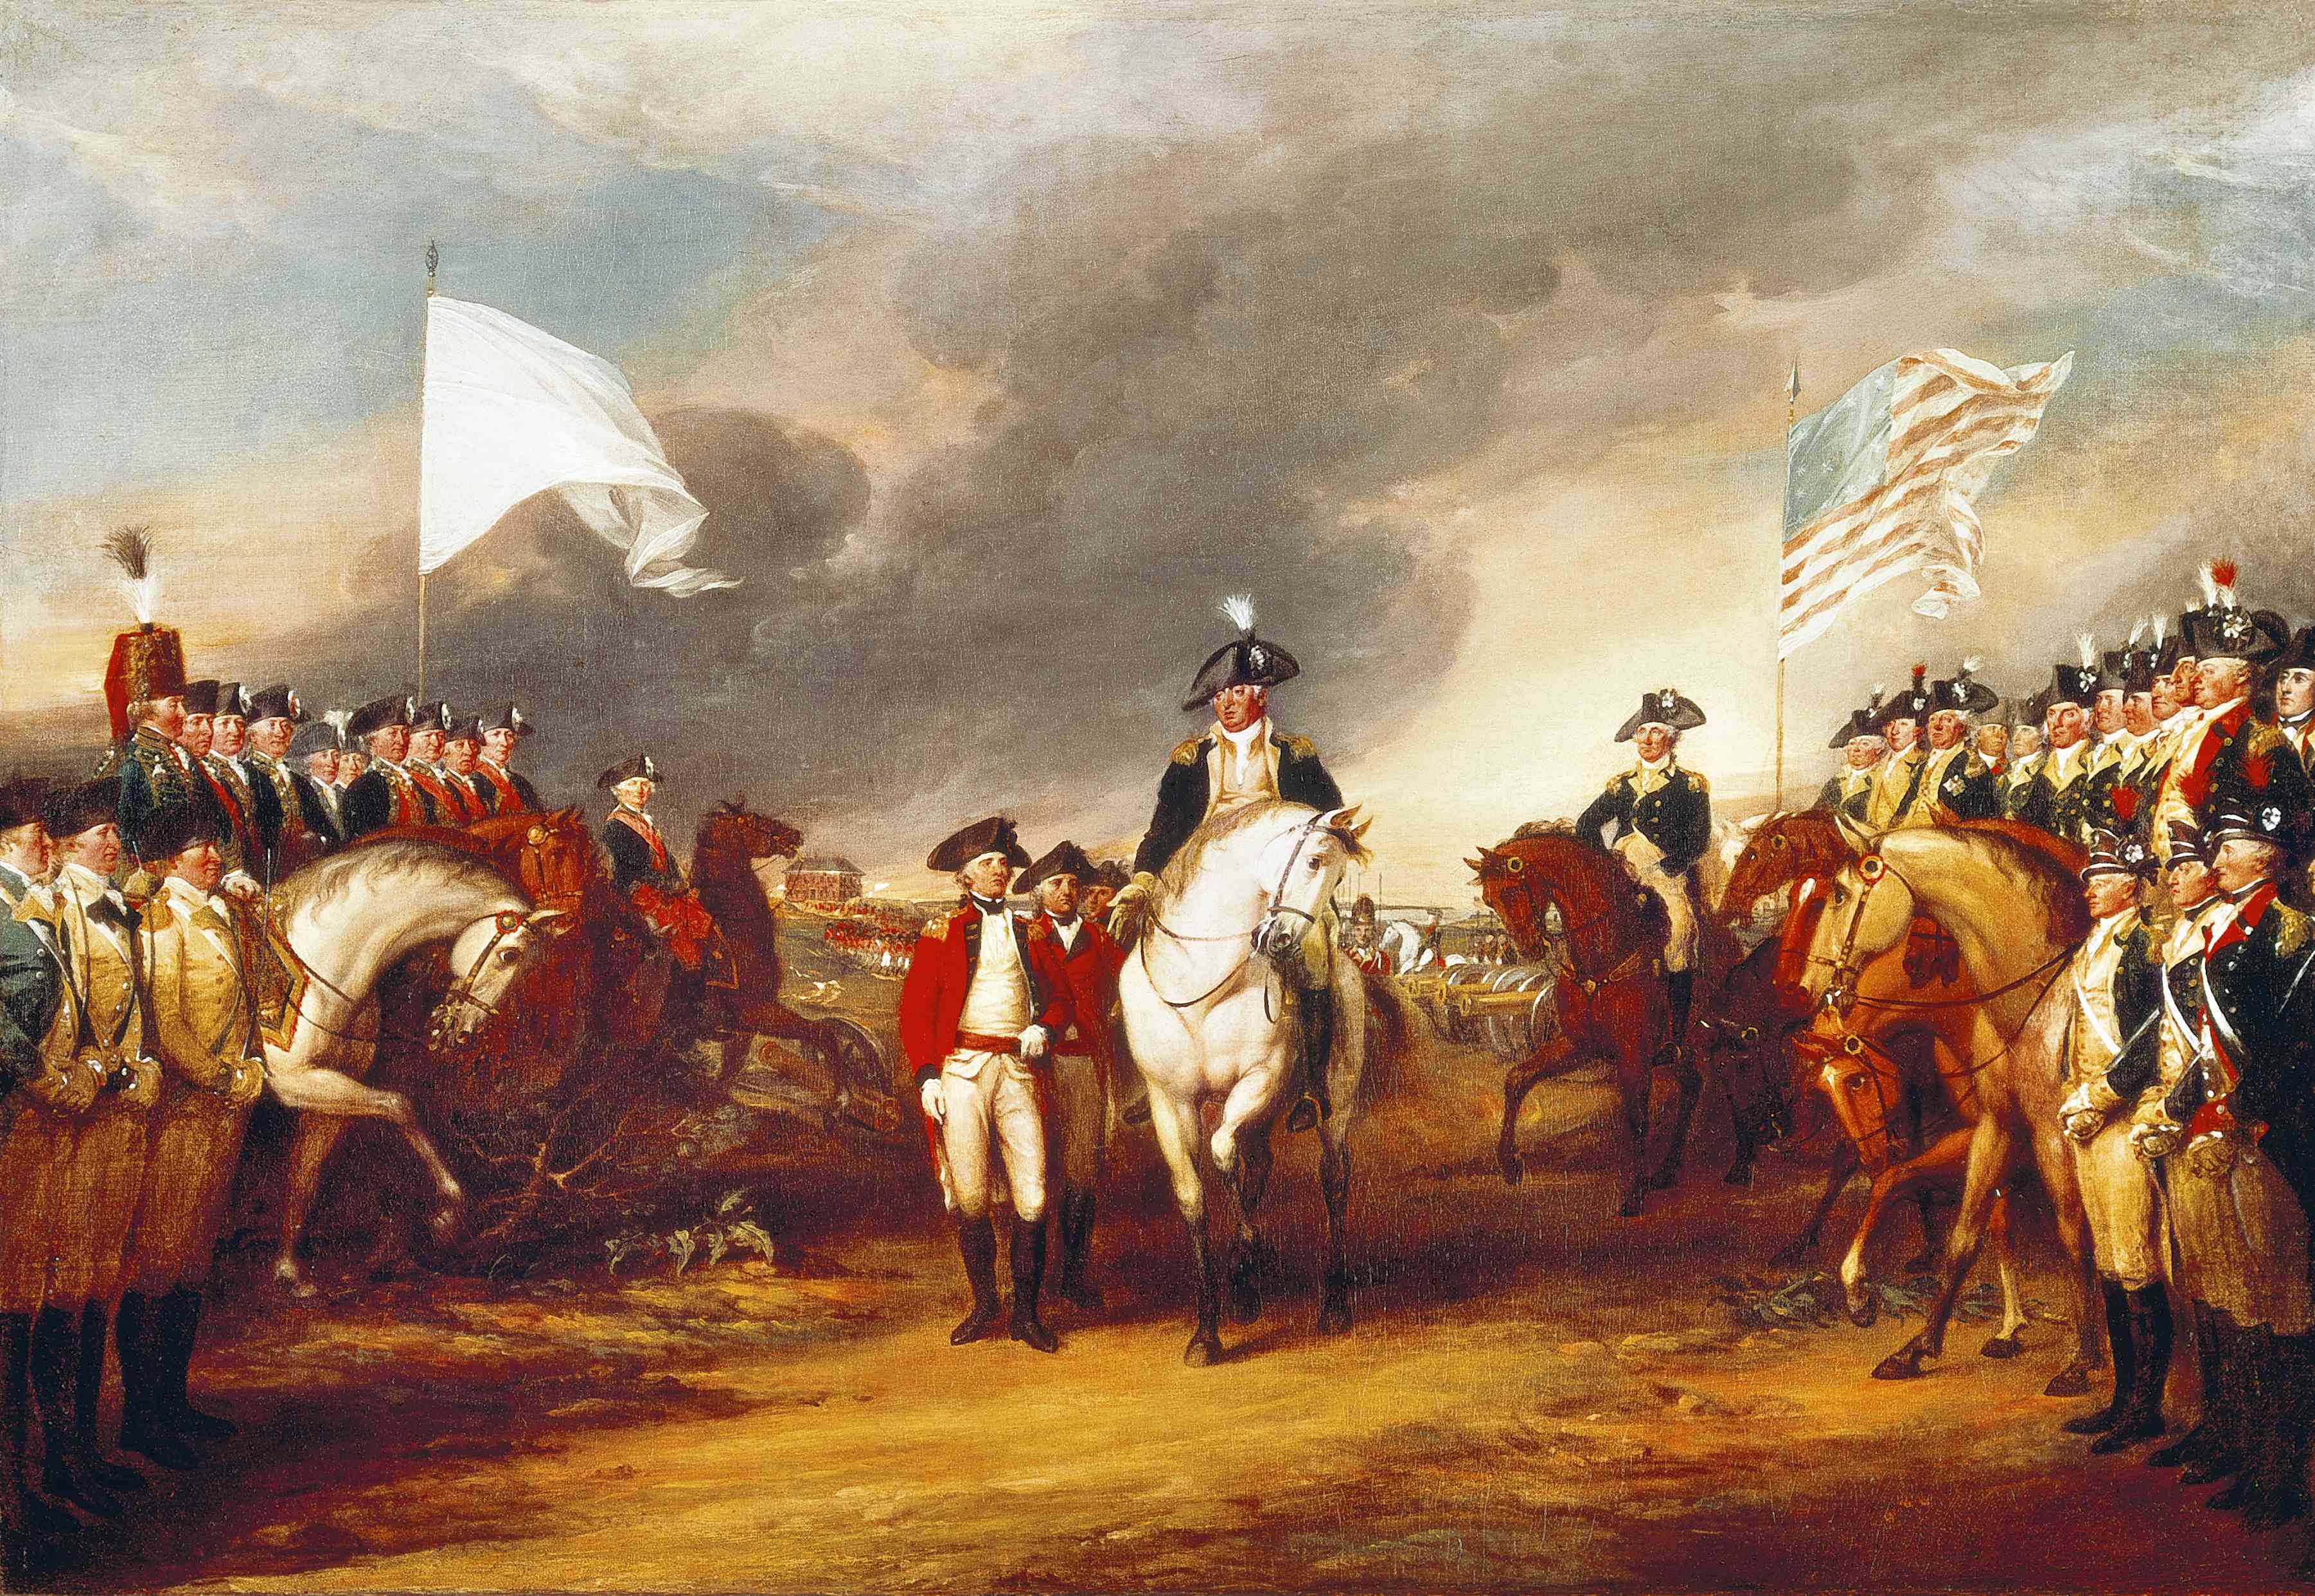 12 Facts That You Might Have Missed Reading About the Revolutionary War